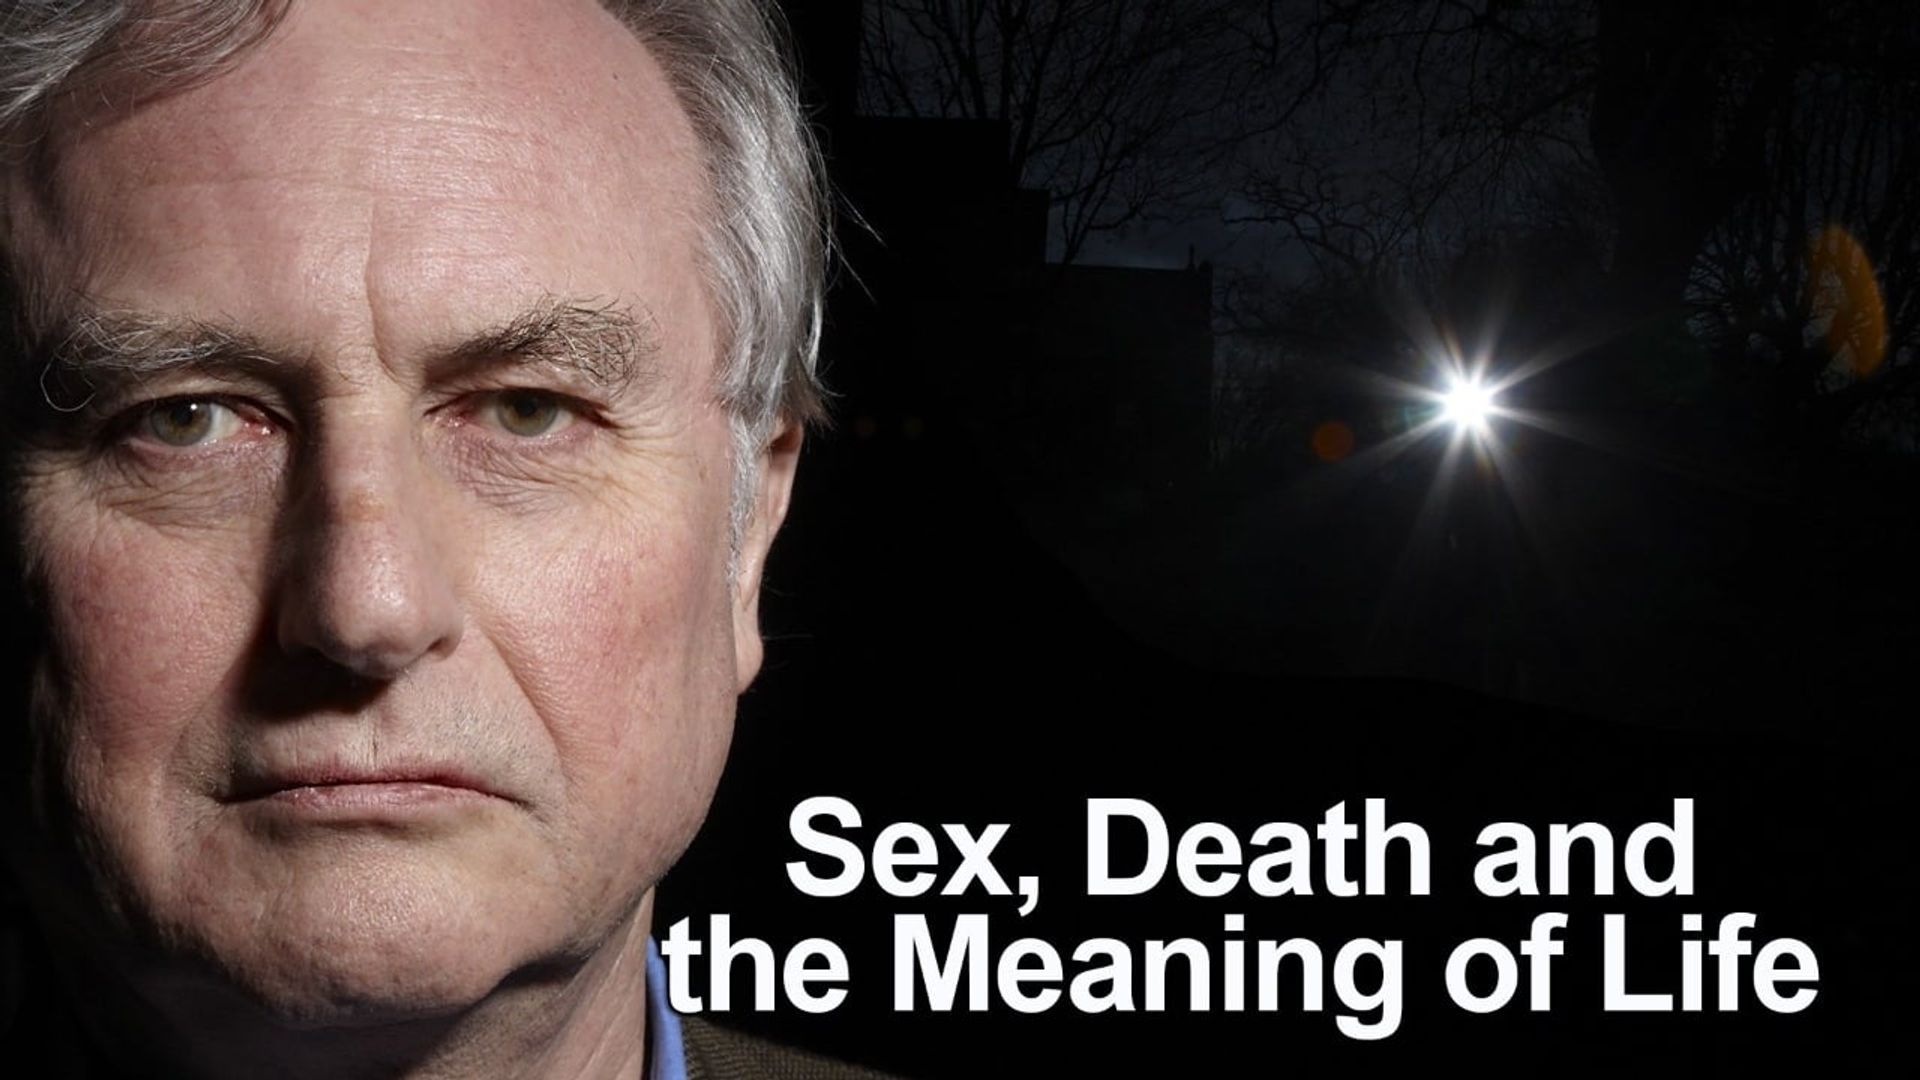 Dawkins: Sex, Death and the Meaning of Life background